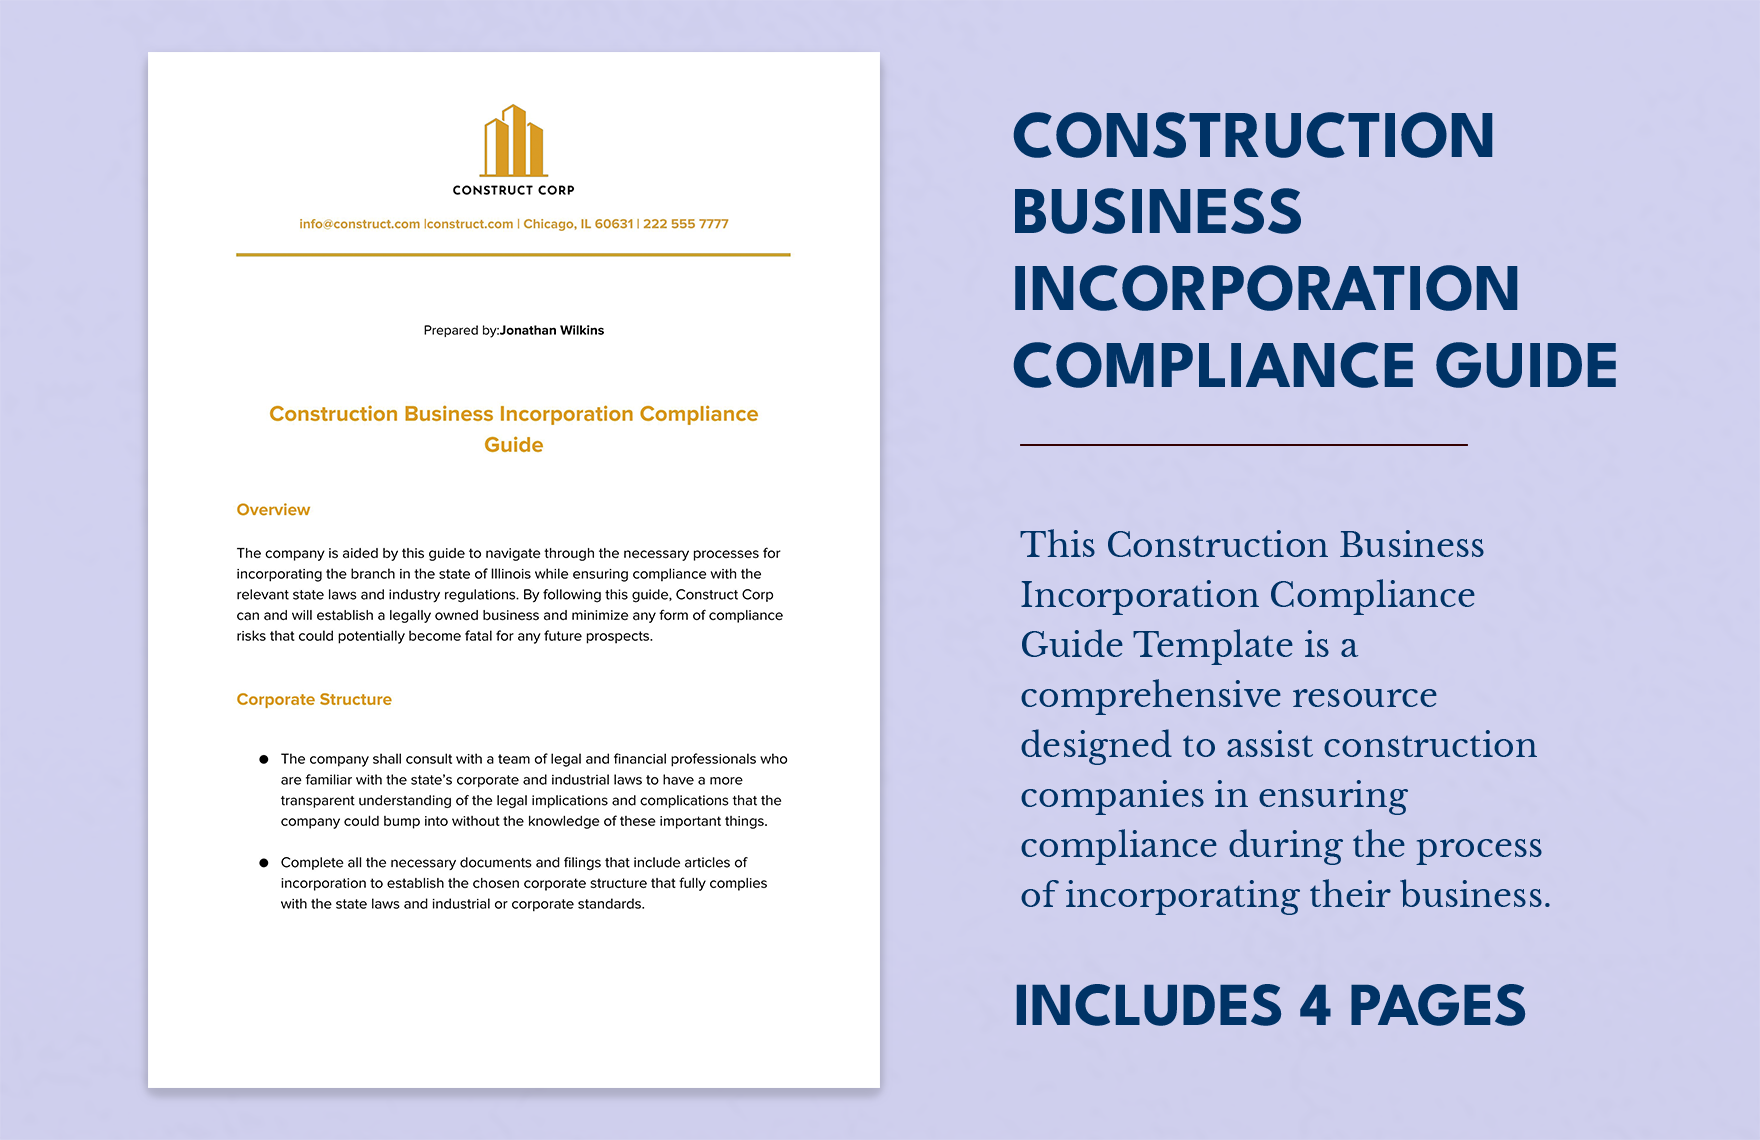 Construction Business Incorporation Compliance Guide